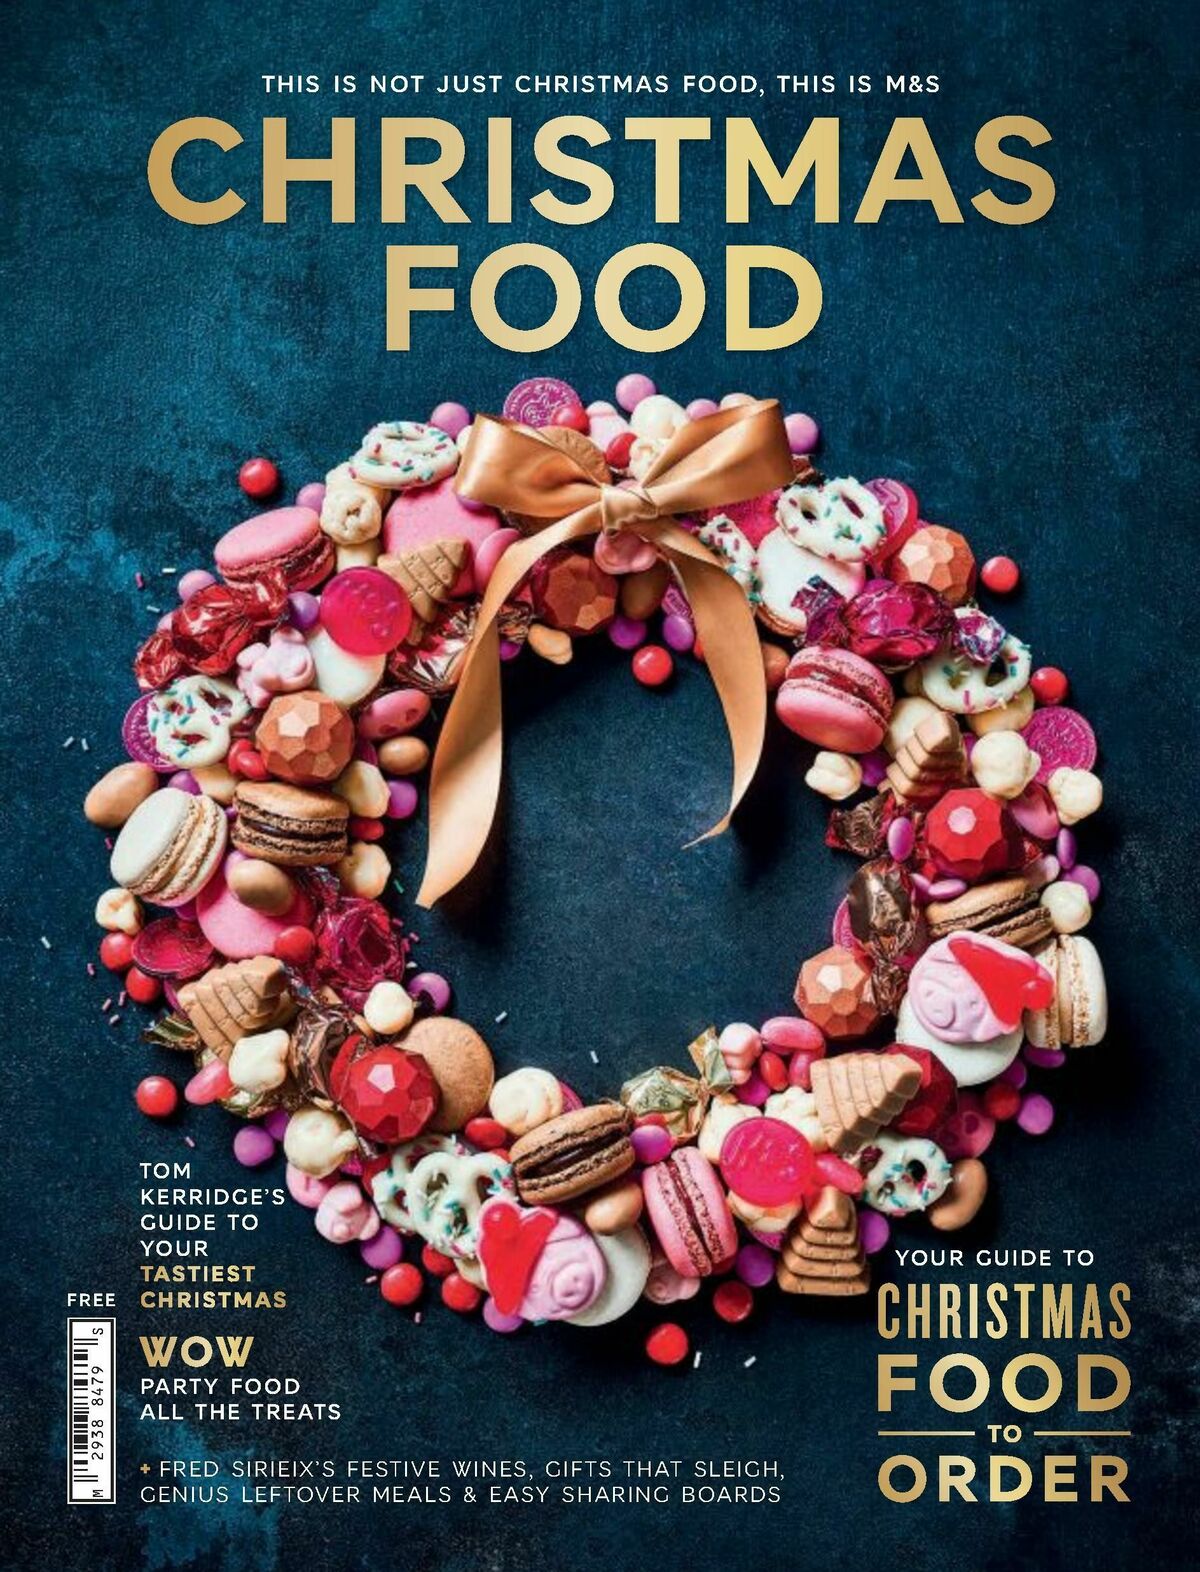 M&S Marks and Spencer Christmas Food Offers & Great savings from 6 October